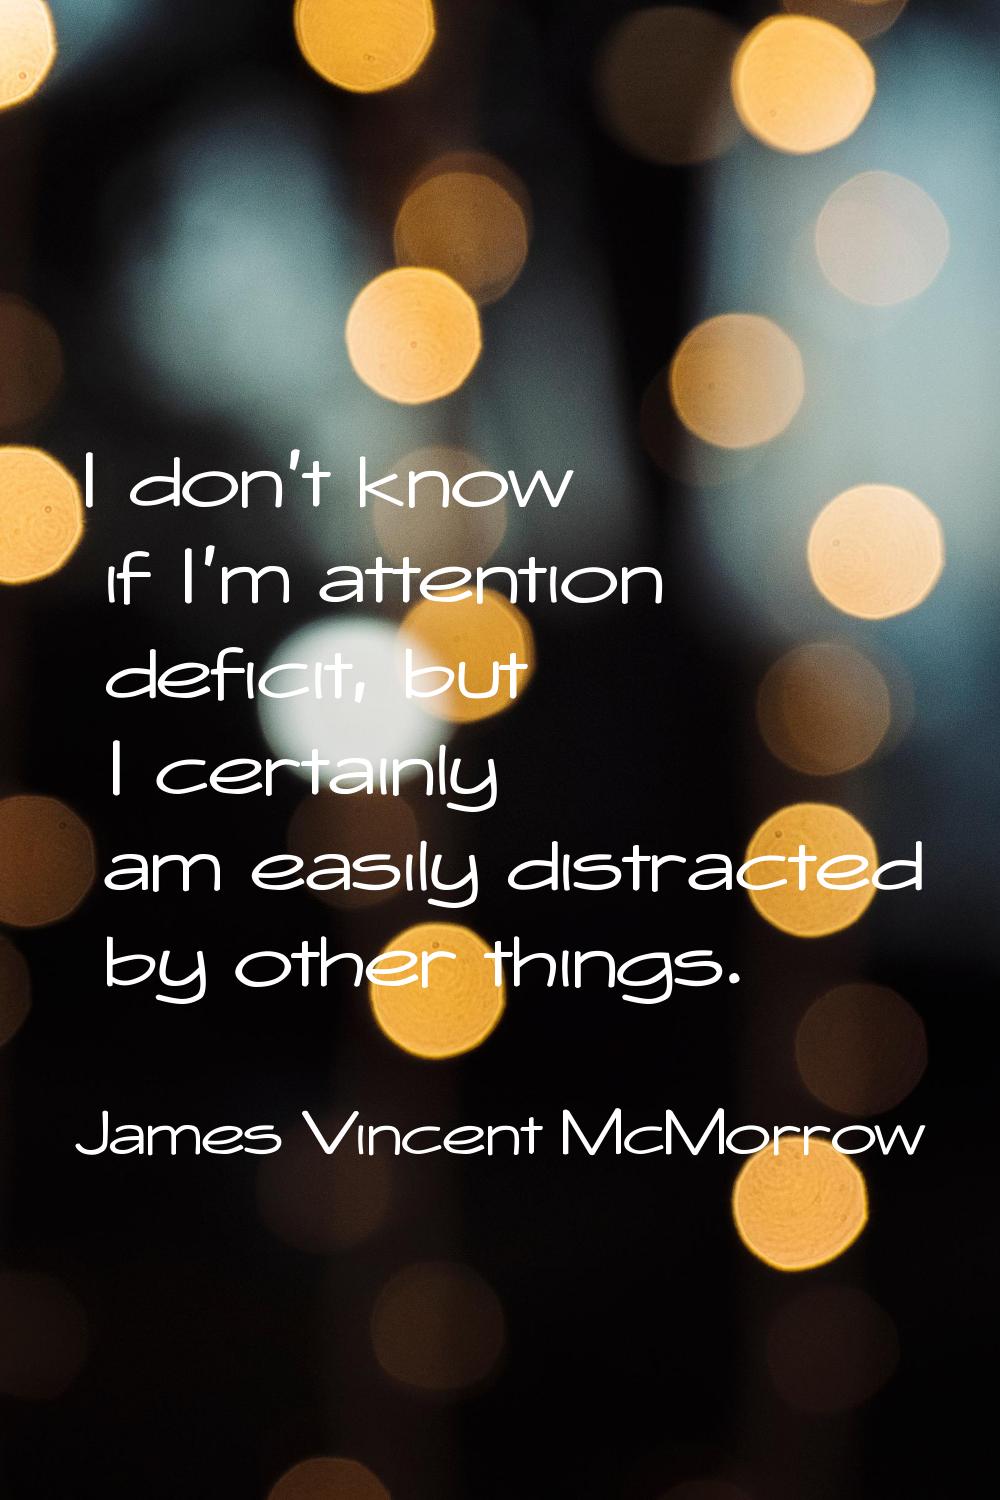 I don't know if I'm attention deficit, but I certainly am easily distracted by other things.